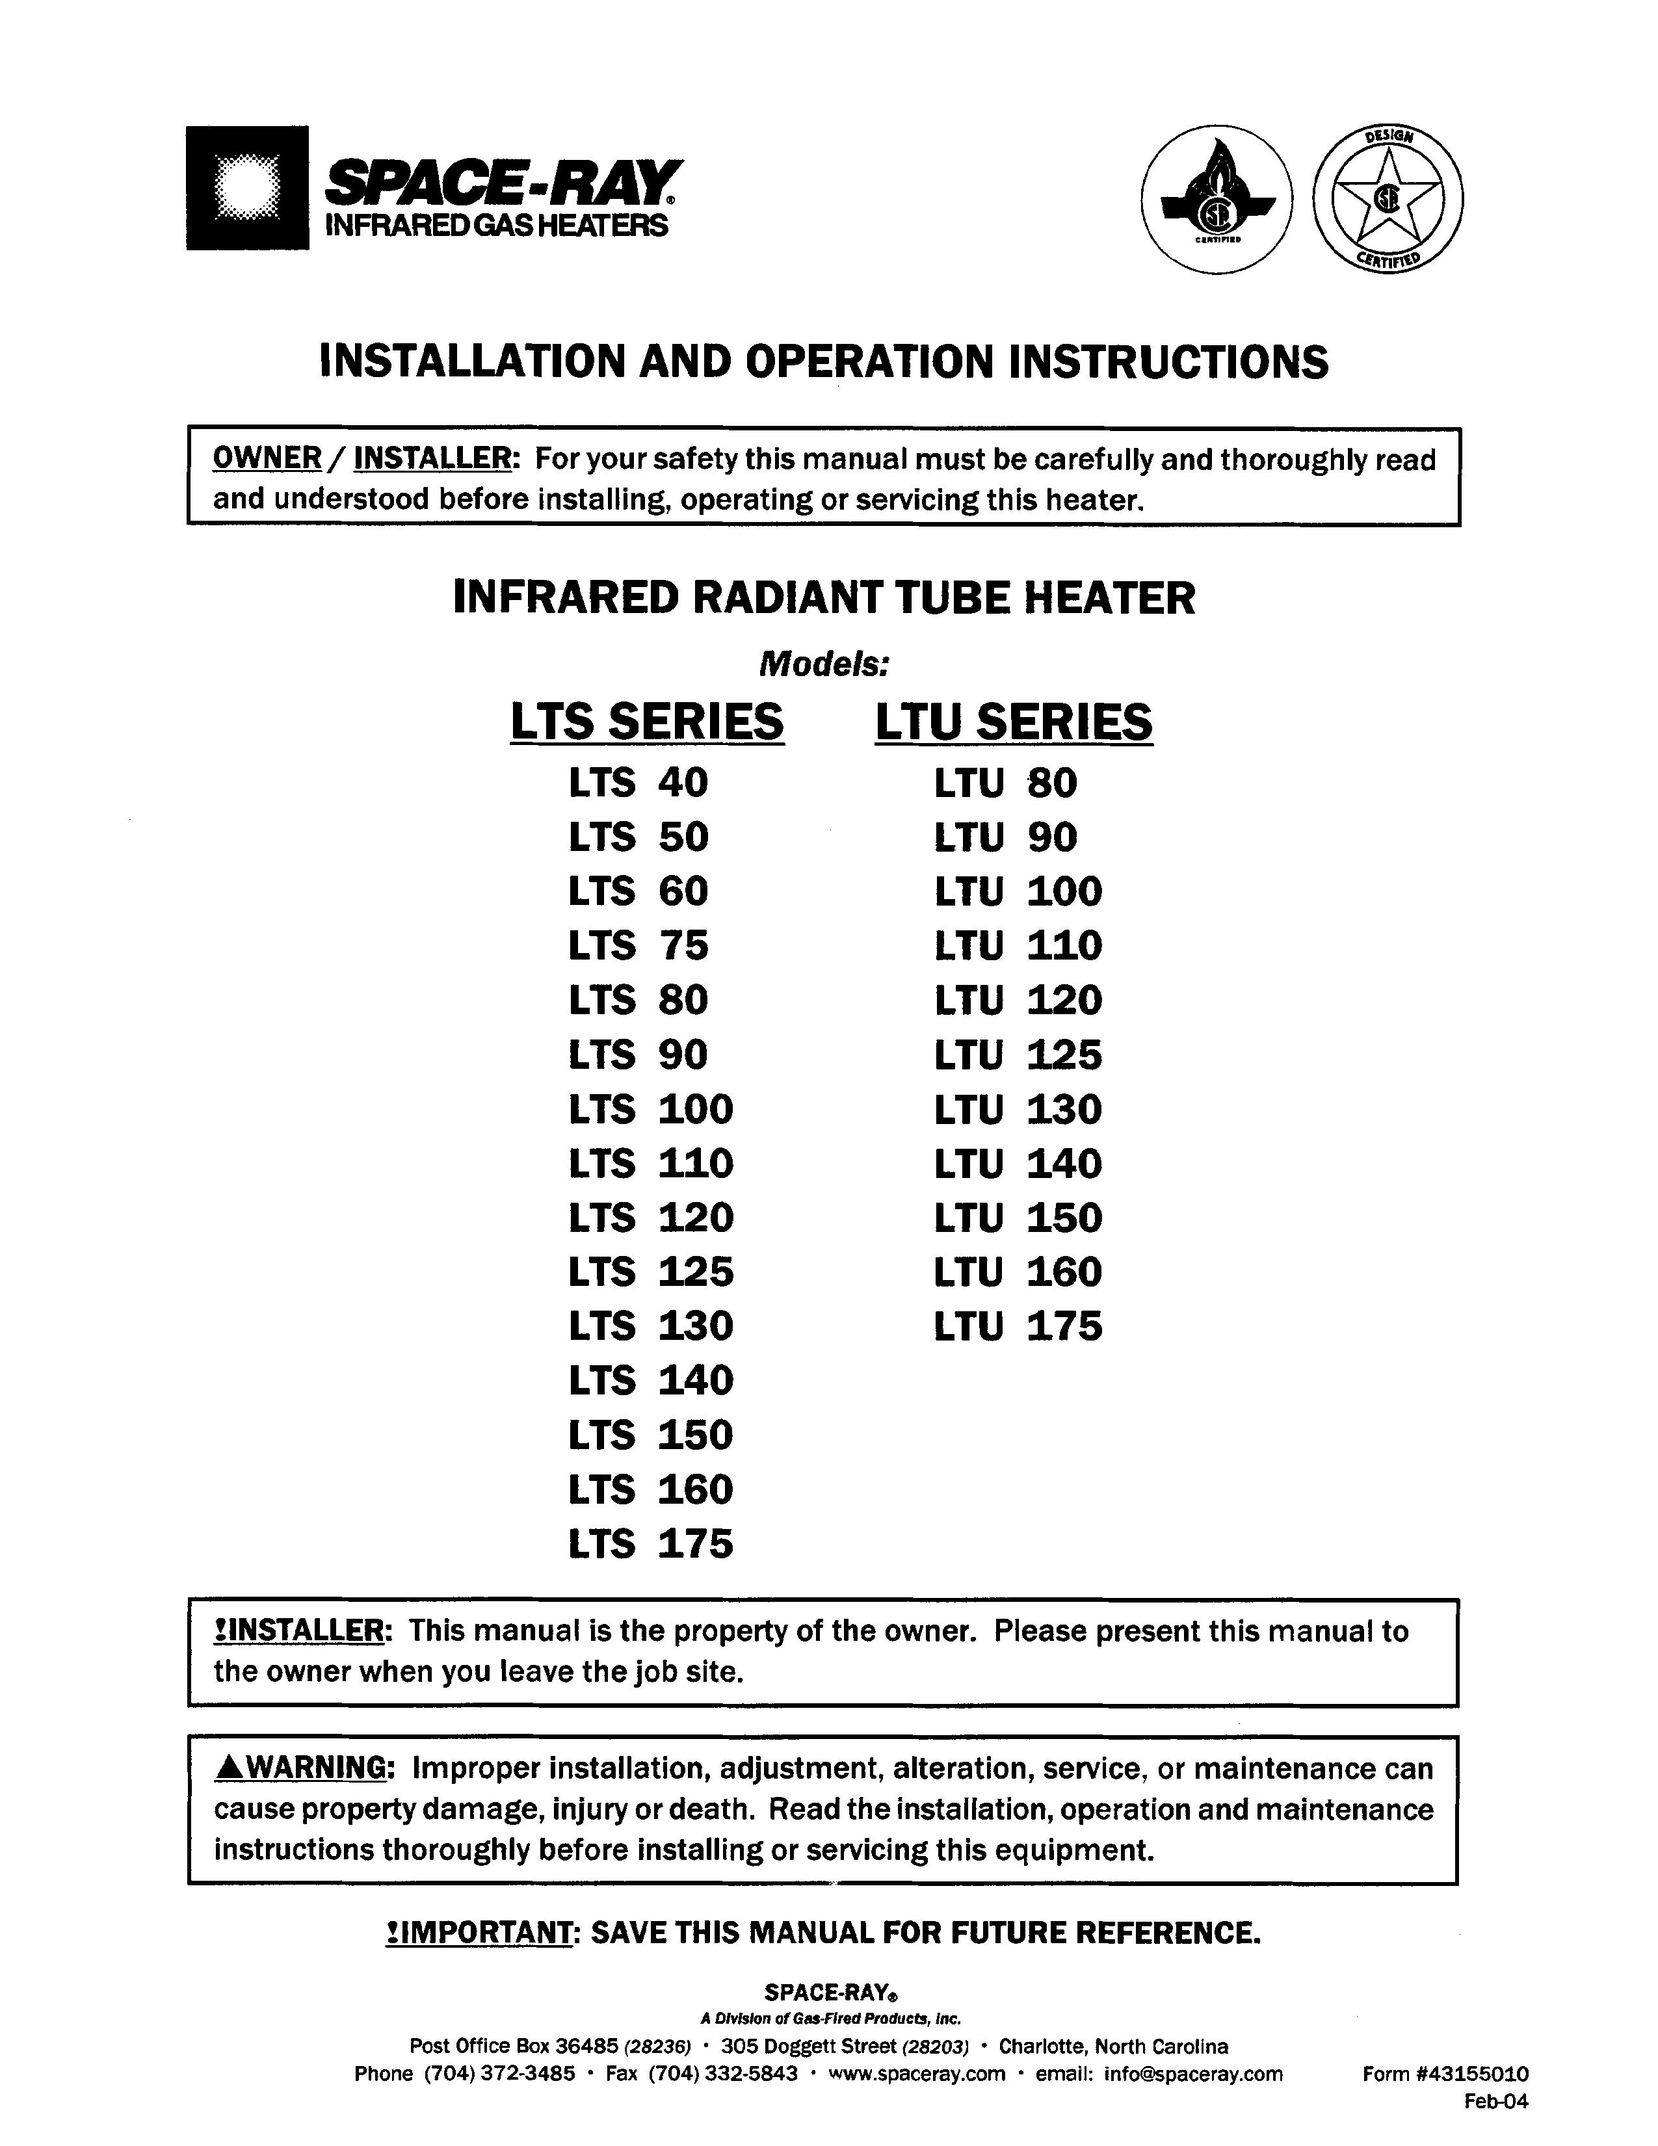 Gas-Fired Products LTS 120 Electric Heater User Manual